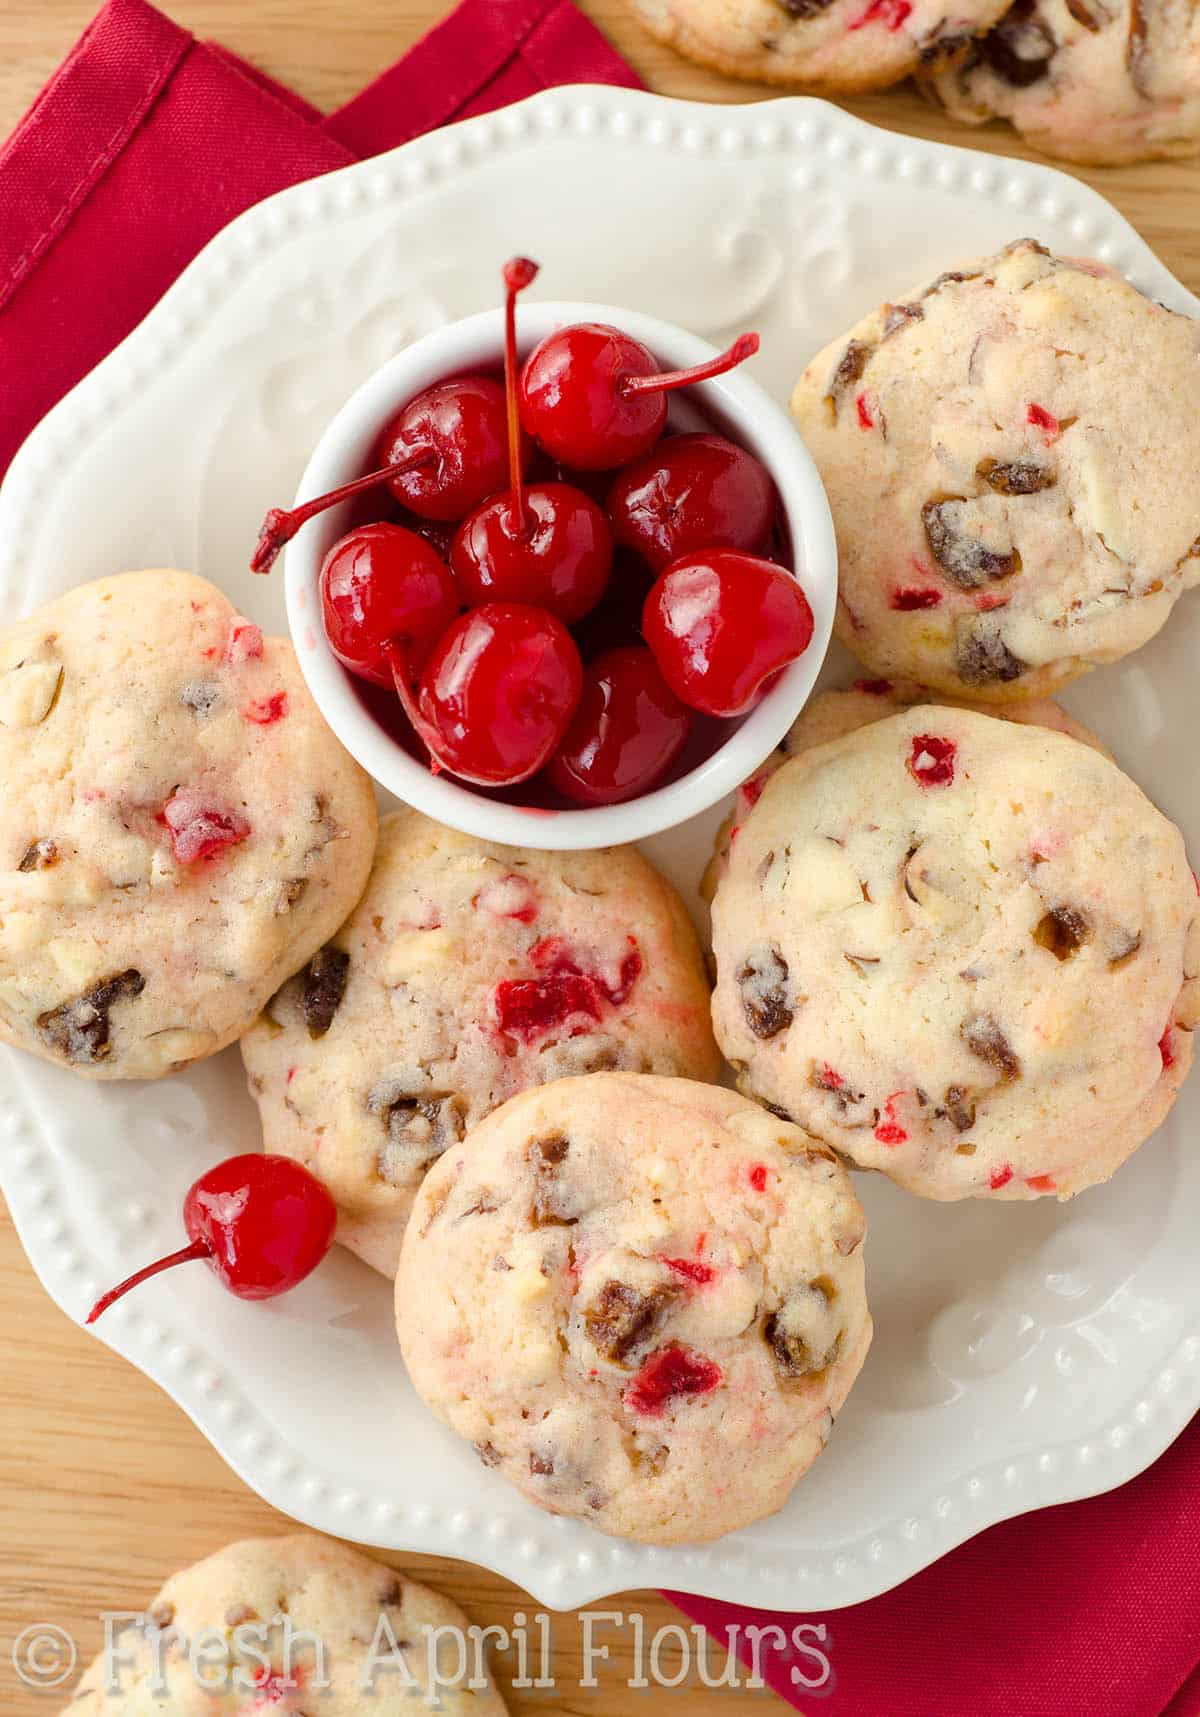 Aerial photo of cherry almond date cookies with a small bowl of maraschino cherries.